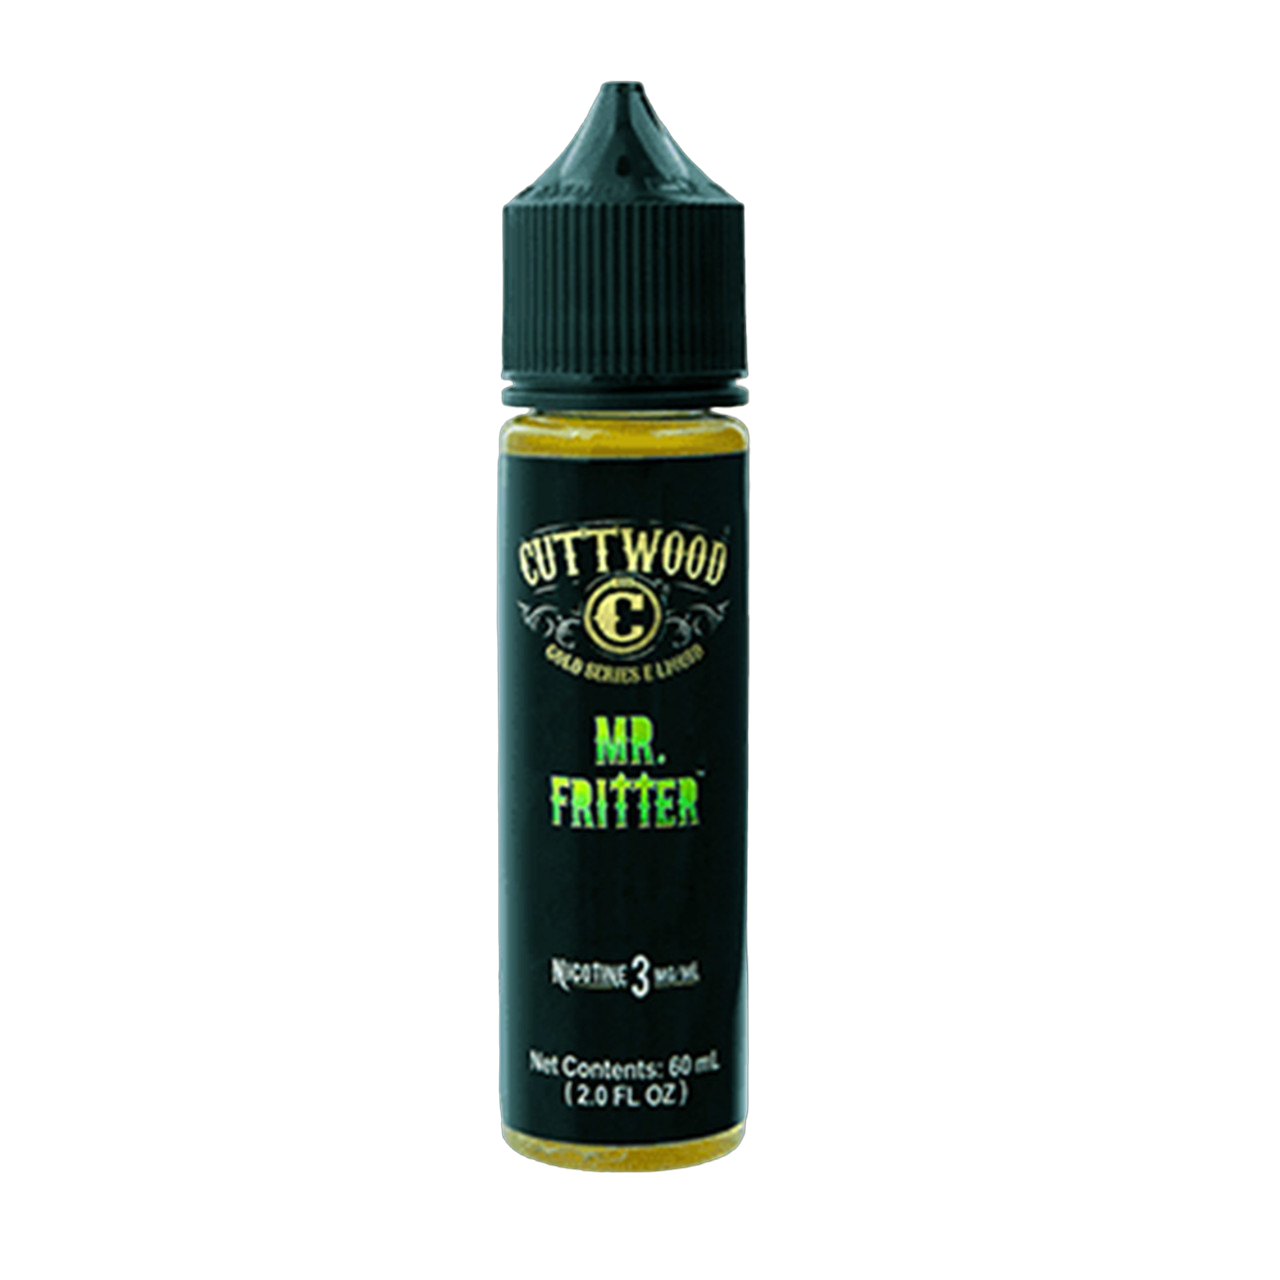 Cuttwood Hand Crafted E-Liquid 60ML - Mr. Fritter